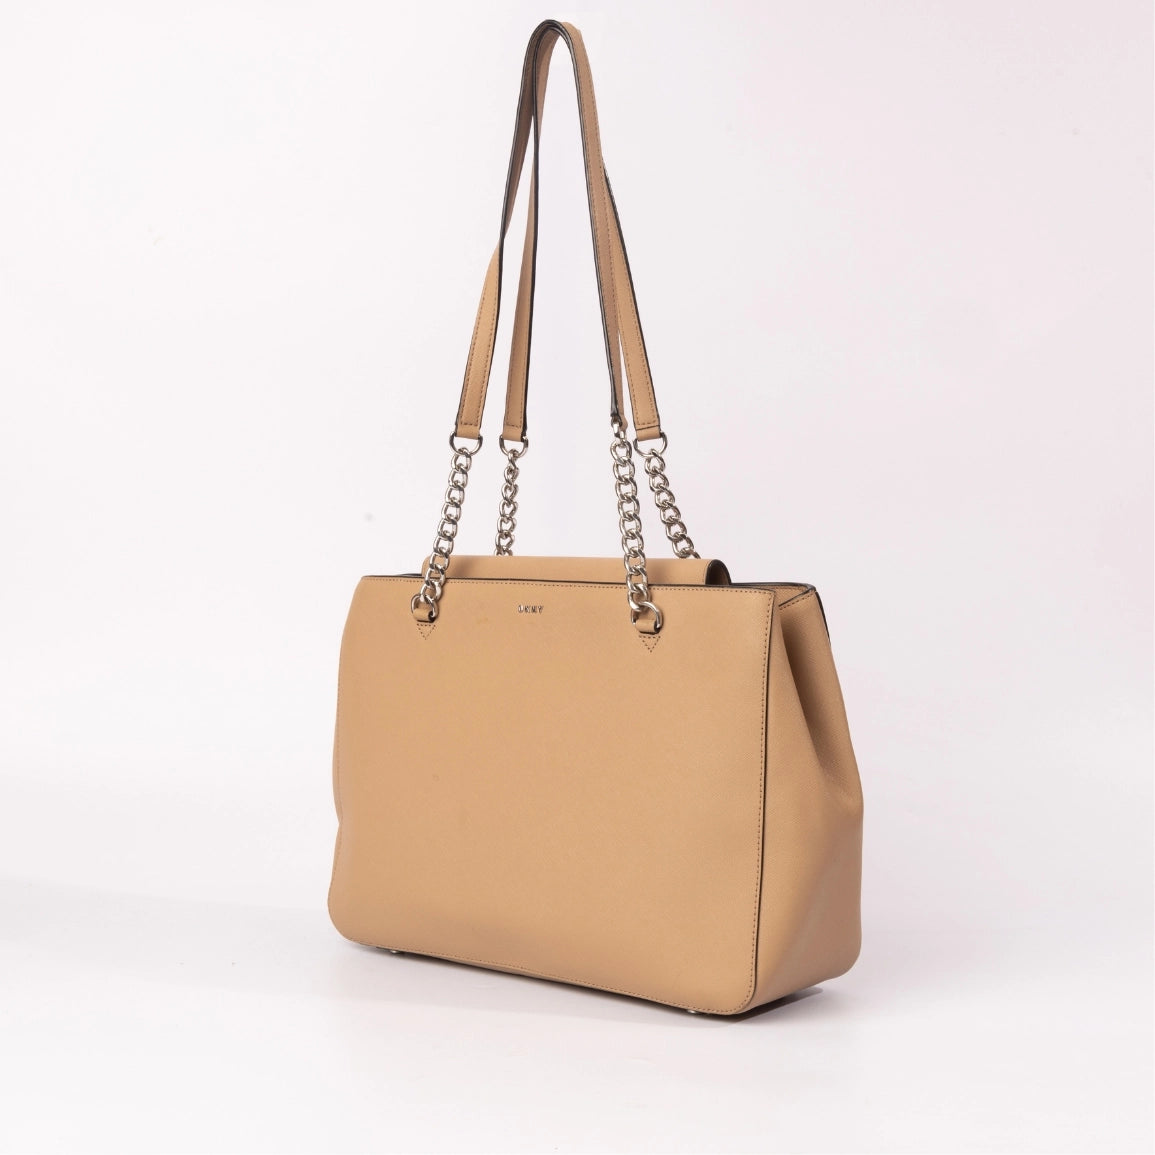 DKNY Bryant Park Chain Handle Tote